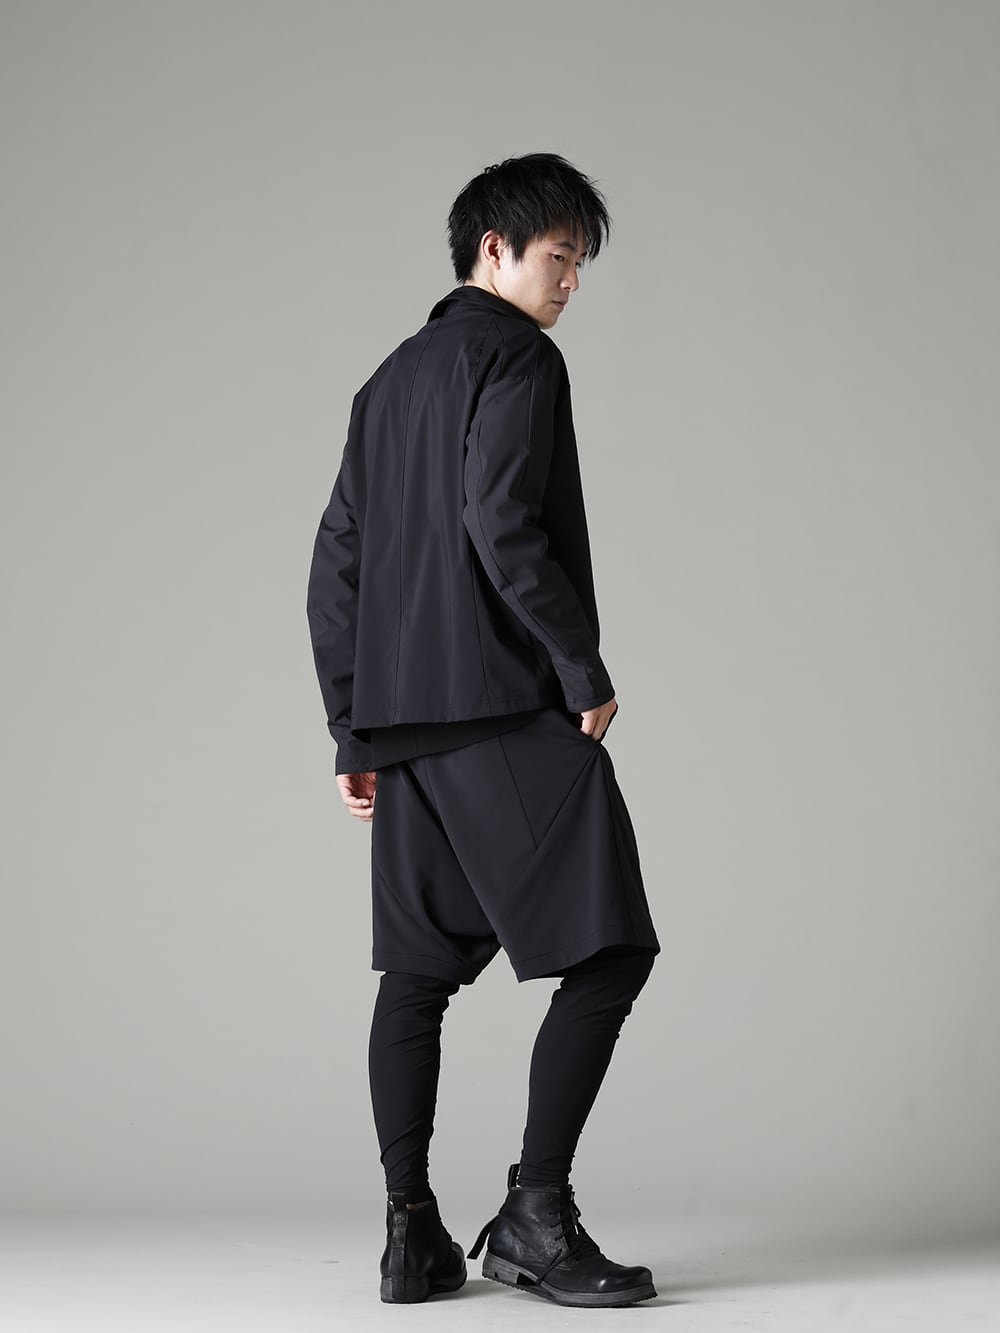 BLOG DEVOA Stretch Dry 22-23AW FASCINATE - Skin” EXIST ”Layered Pants